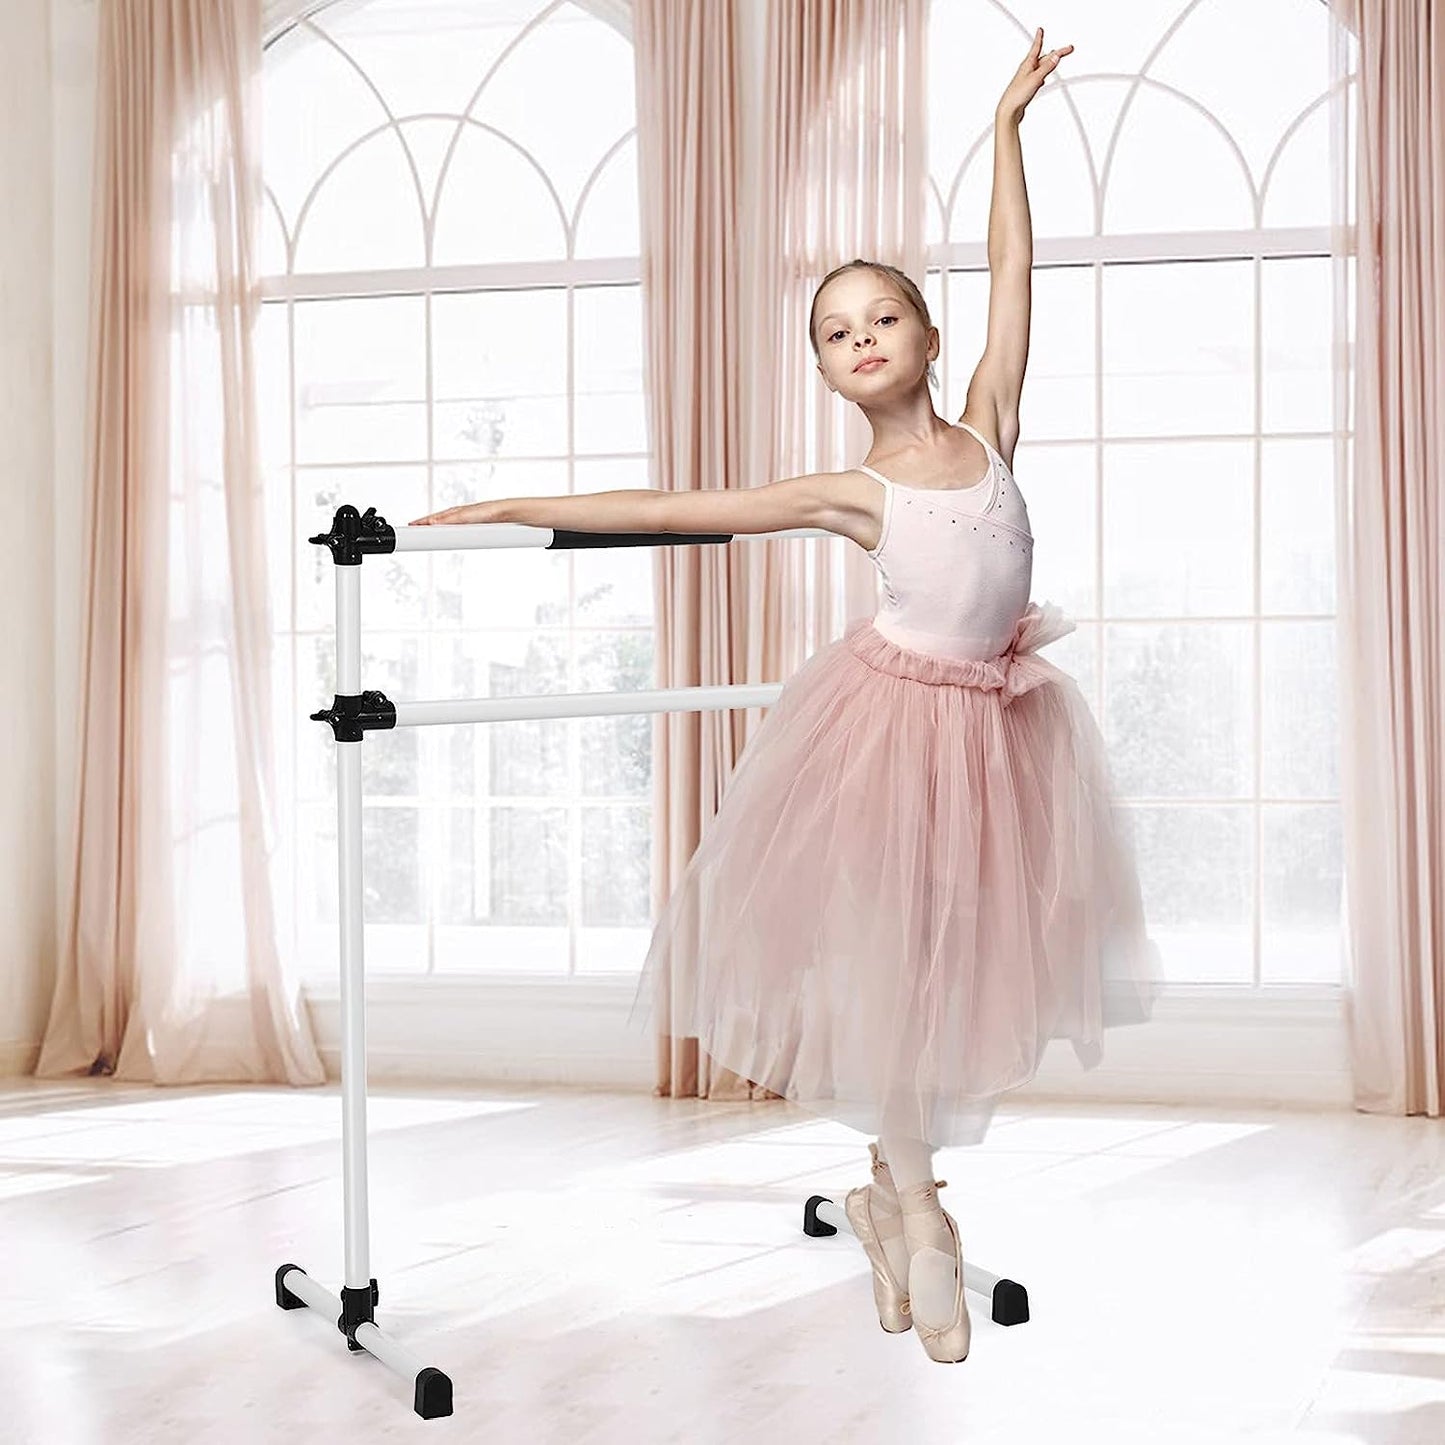 Double Ballet Portable 4FT Adjustable Freestanding Ballet Fitness Stretching Dancing Bar for Home Studio Adult and Kids